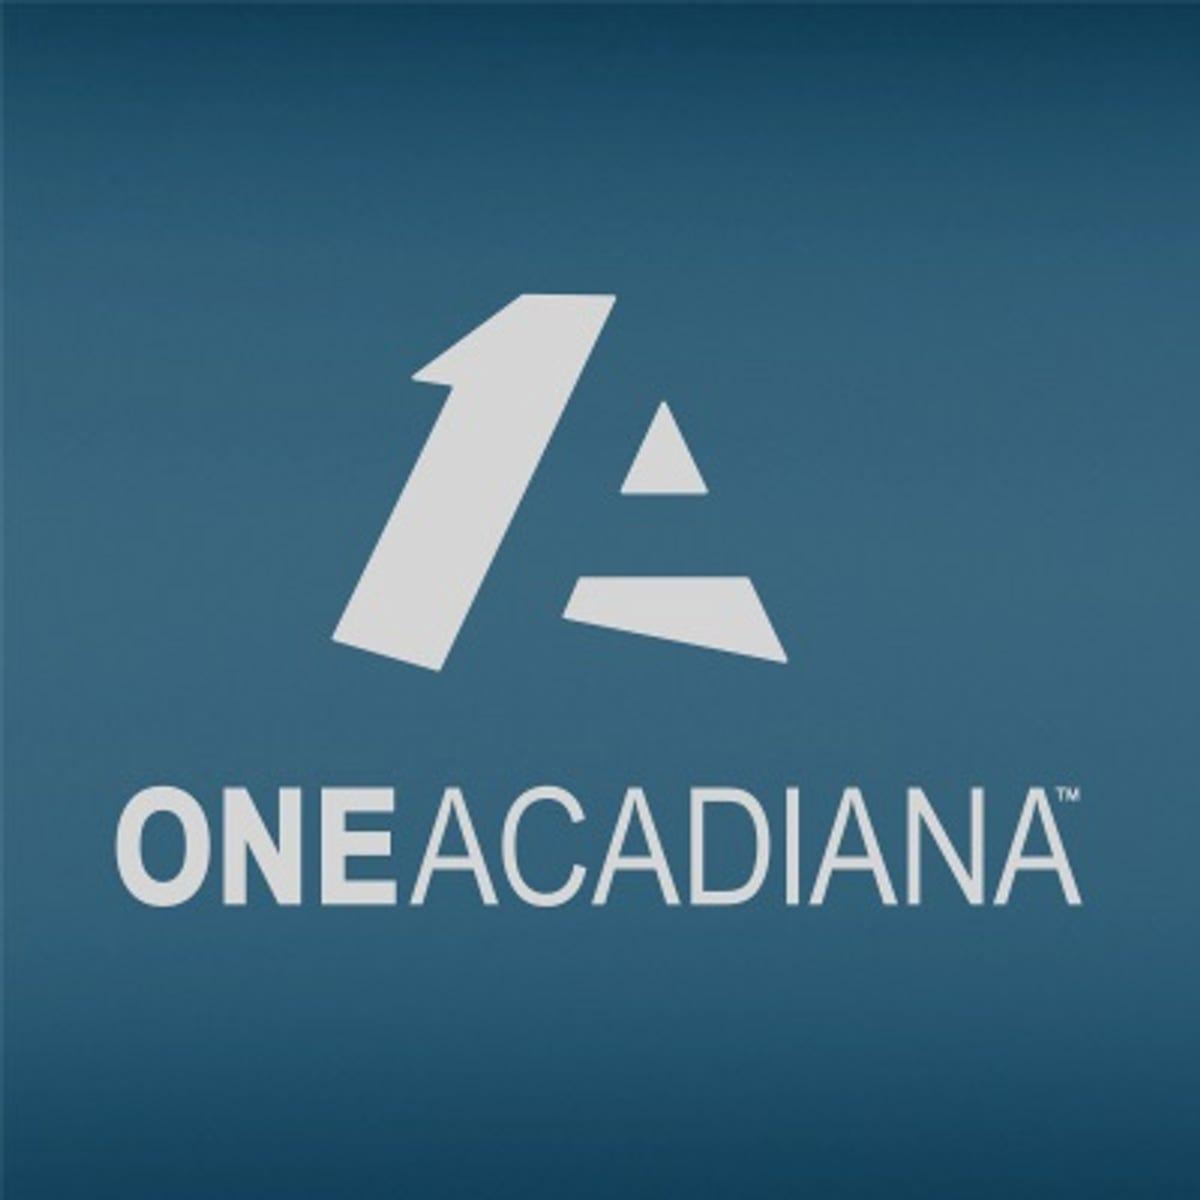 Acadiana Logo - One Acadiana, The Lafayette Area Chamber Of Commerce, Announces New CEO